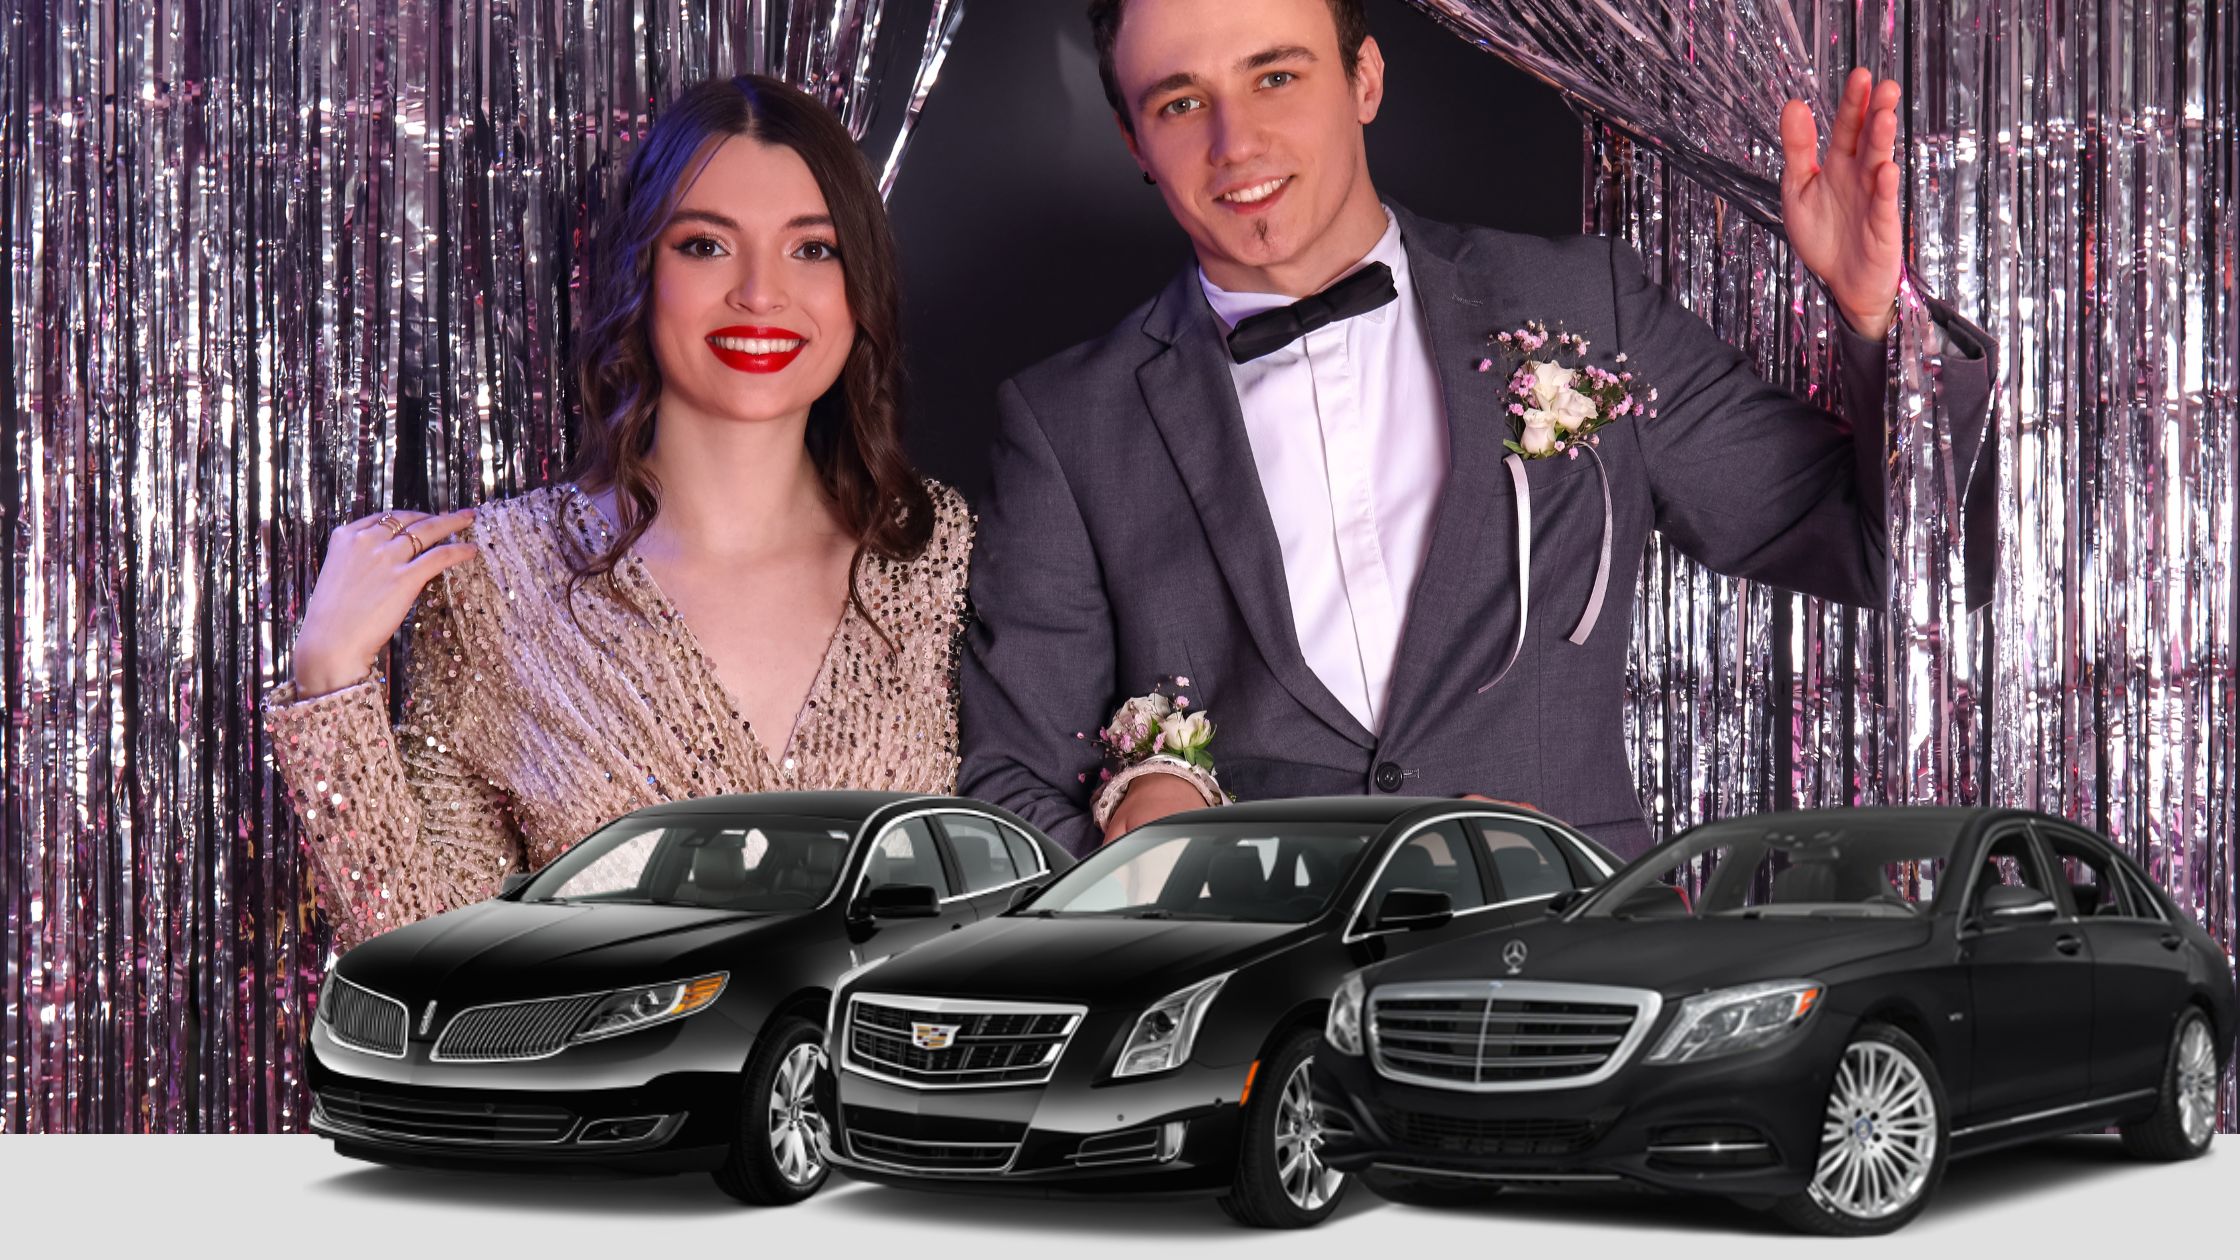 Exquisite Prom Limo Rentals in Long Island | Make It Memorable